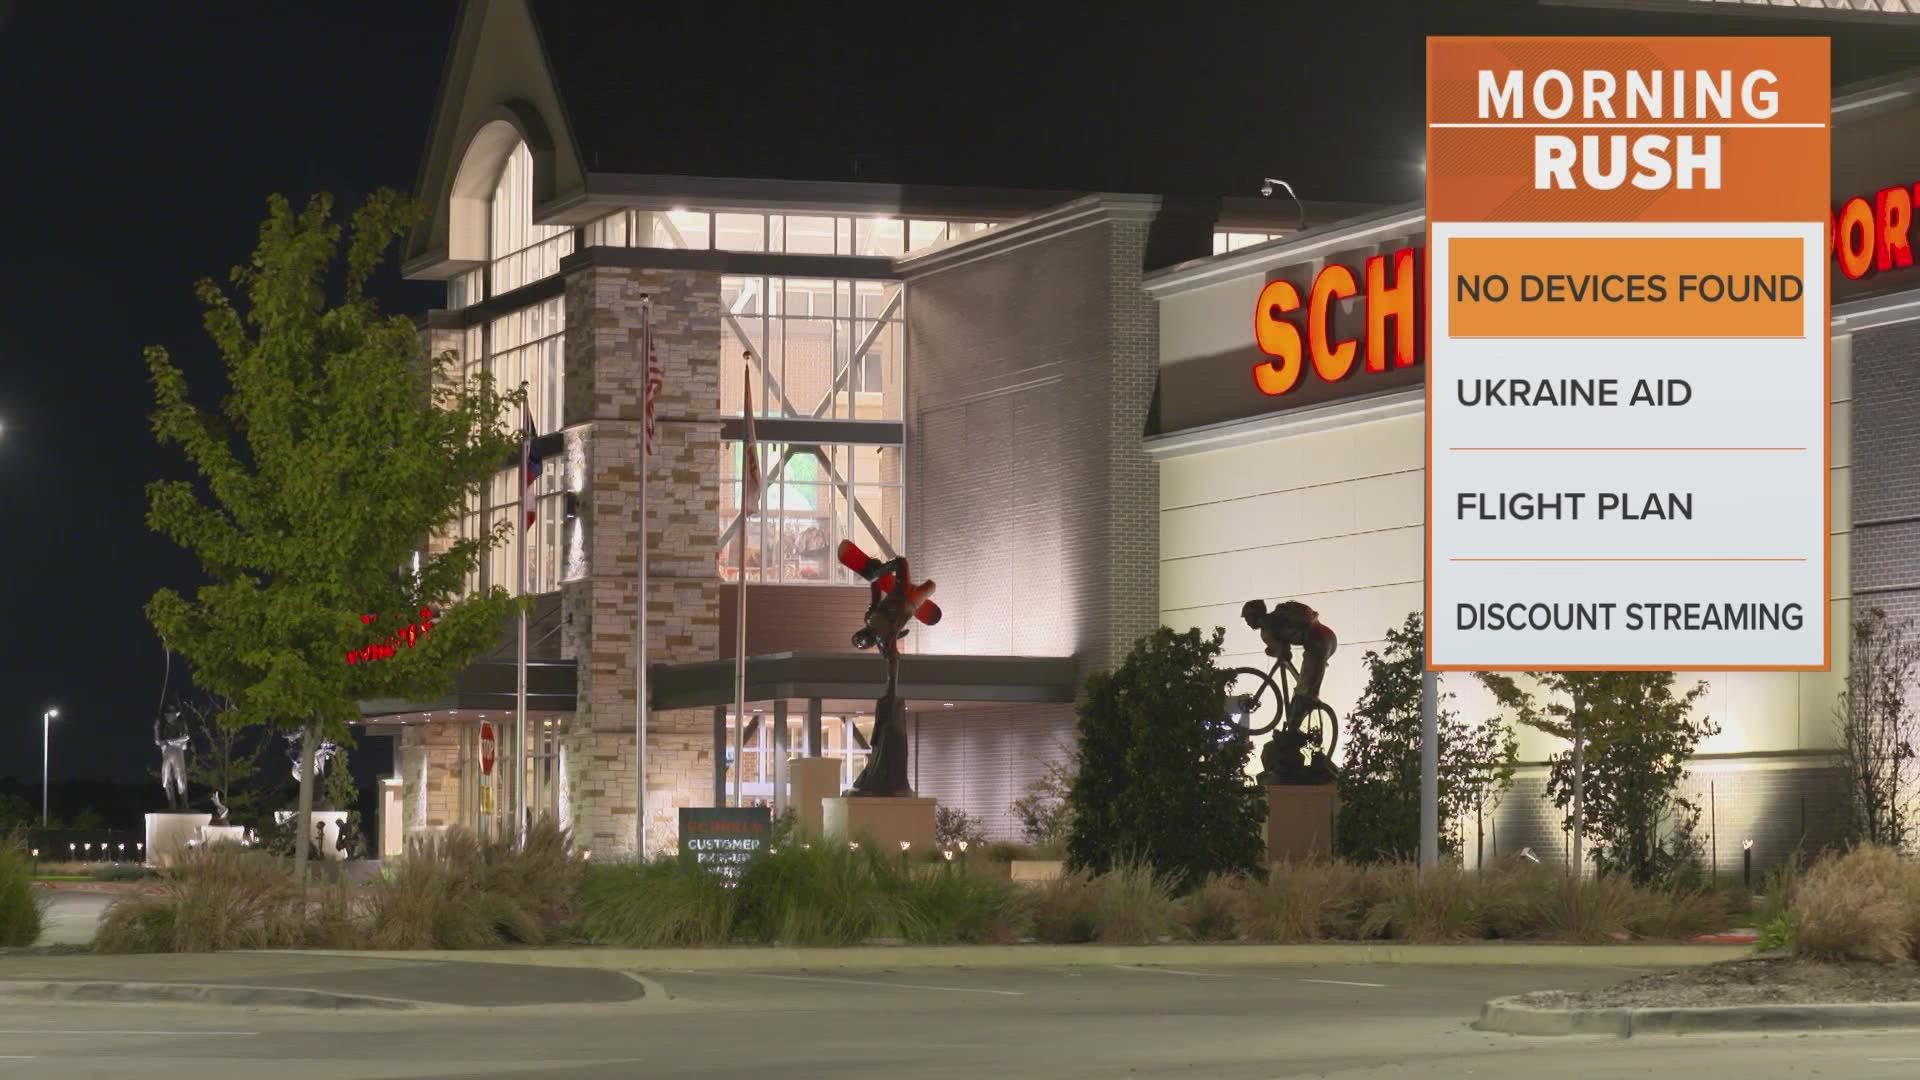 Police say they received a call about a bomb threat around 8 p.m. at the Scheels store.